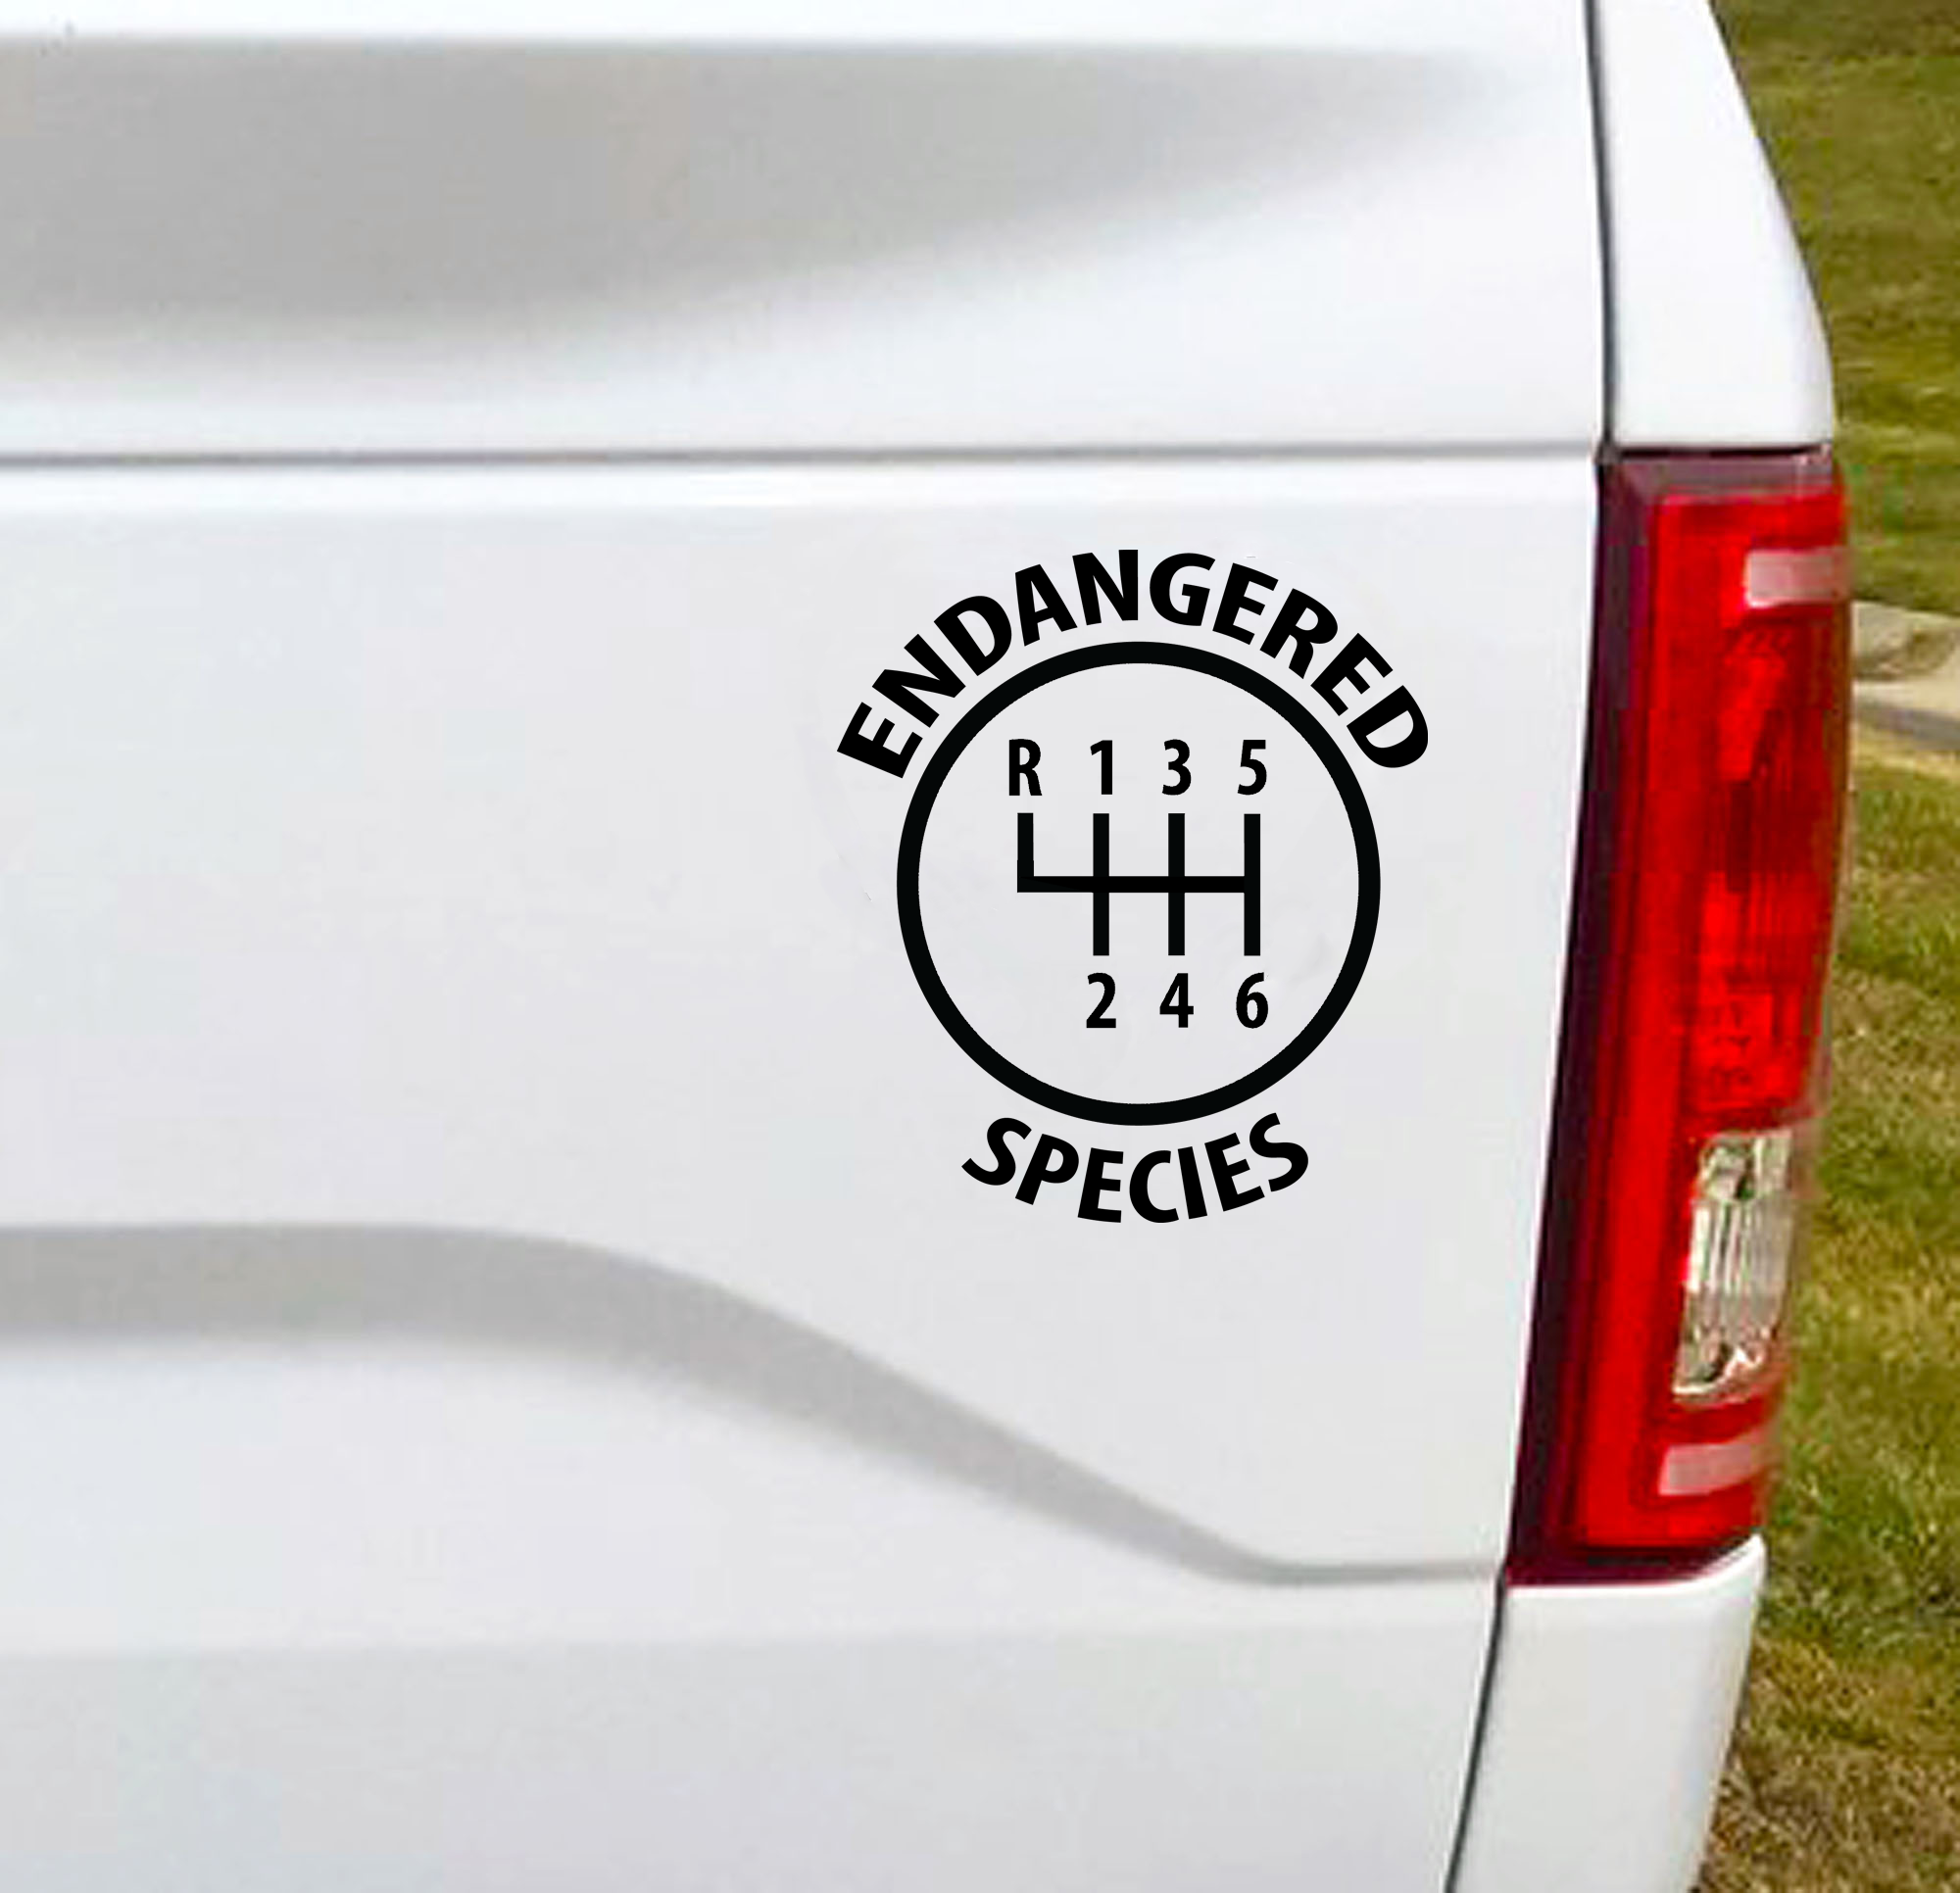 Endangered Species  Vinyl Car Decal Bumper Sticker is a must have to add to your back window. Manual transmissions / Stick Shift, truly is an endangered species.  3.52"W x 4"H Car Decal, Car Sticker, Car Vinyl, Bumper Sticker, Vinyl Stickers, Vinyl Sticker.  FREE SHIPPING FOR ALL VINYL DECALS within Canada and the US.